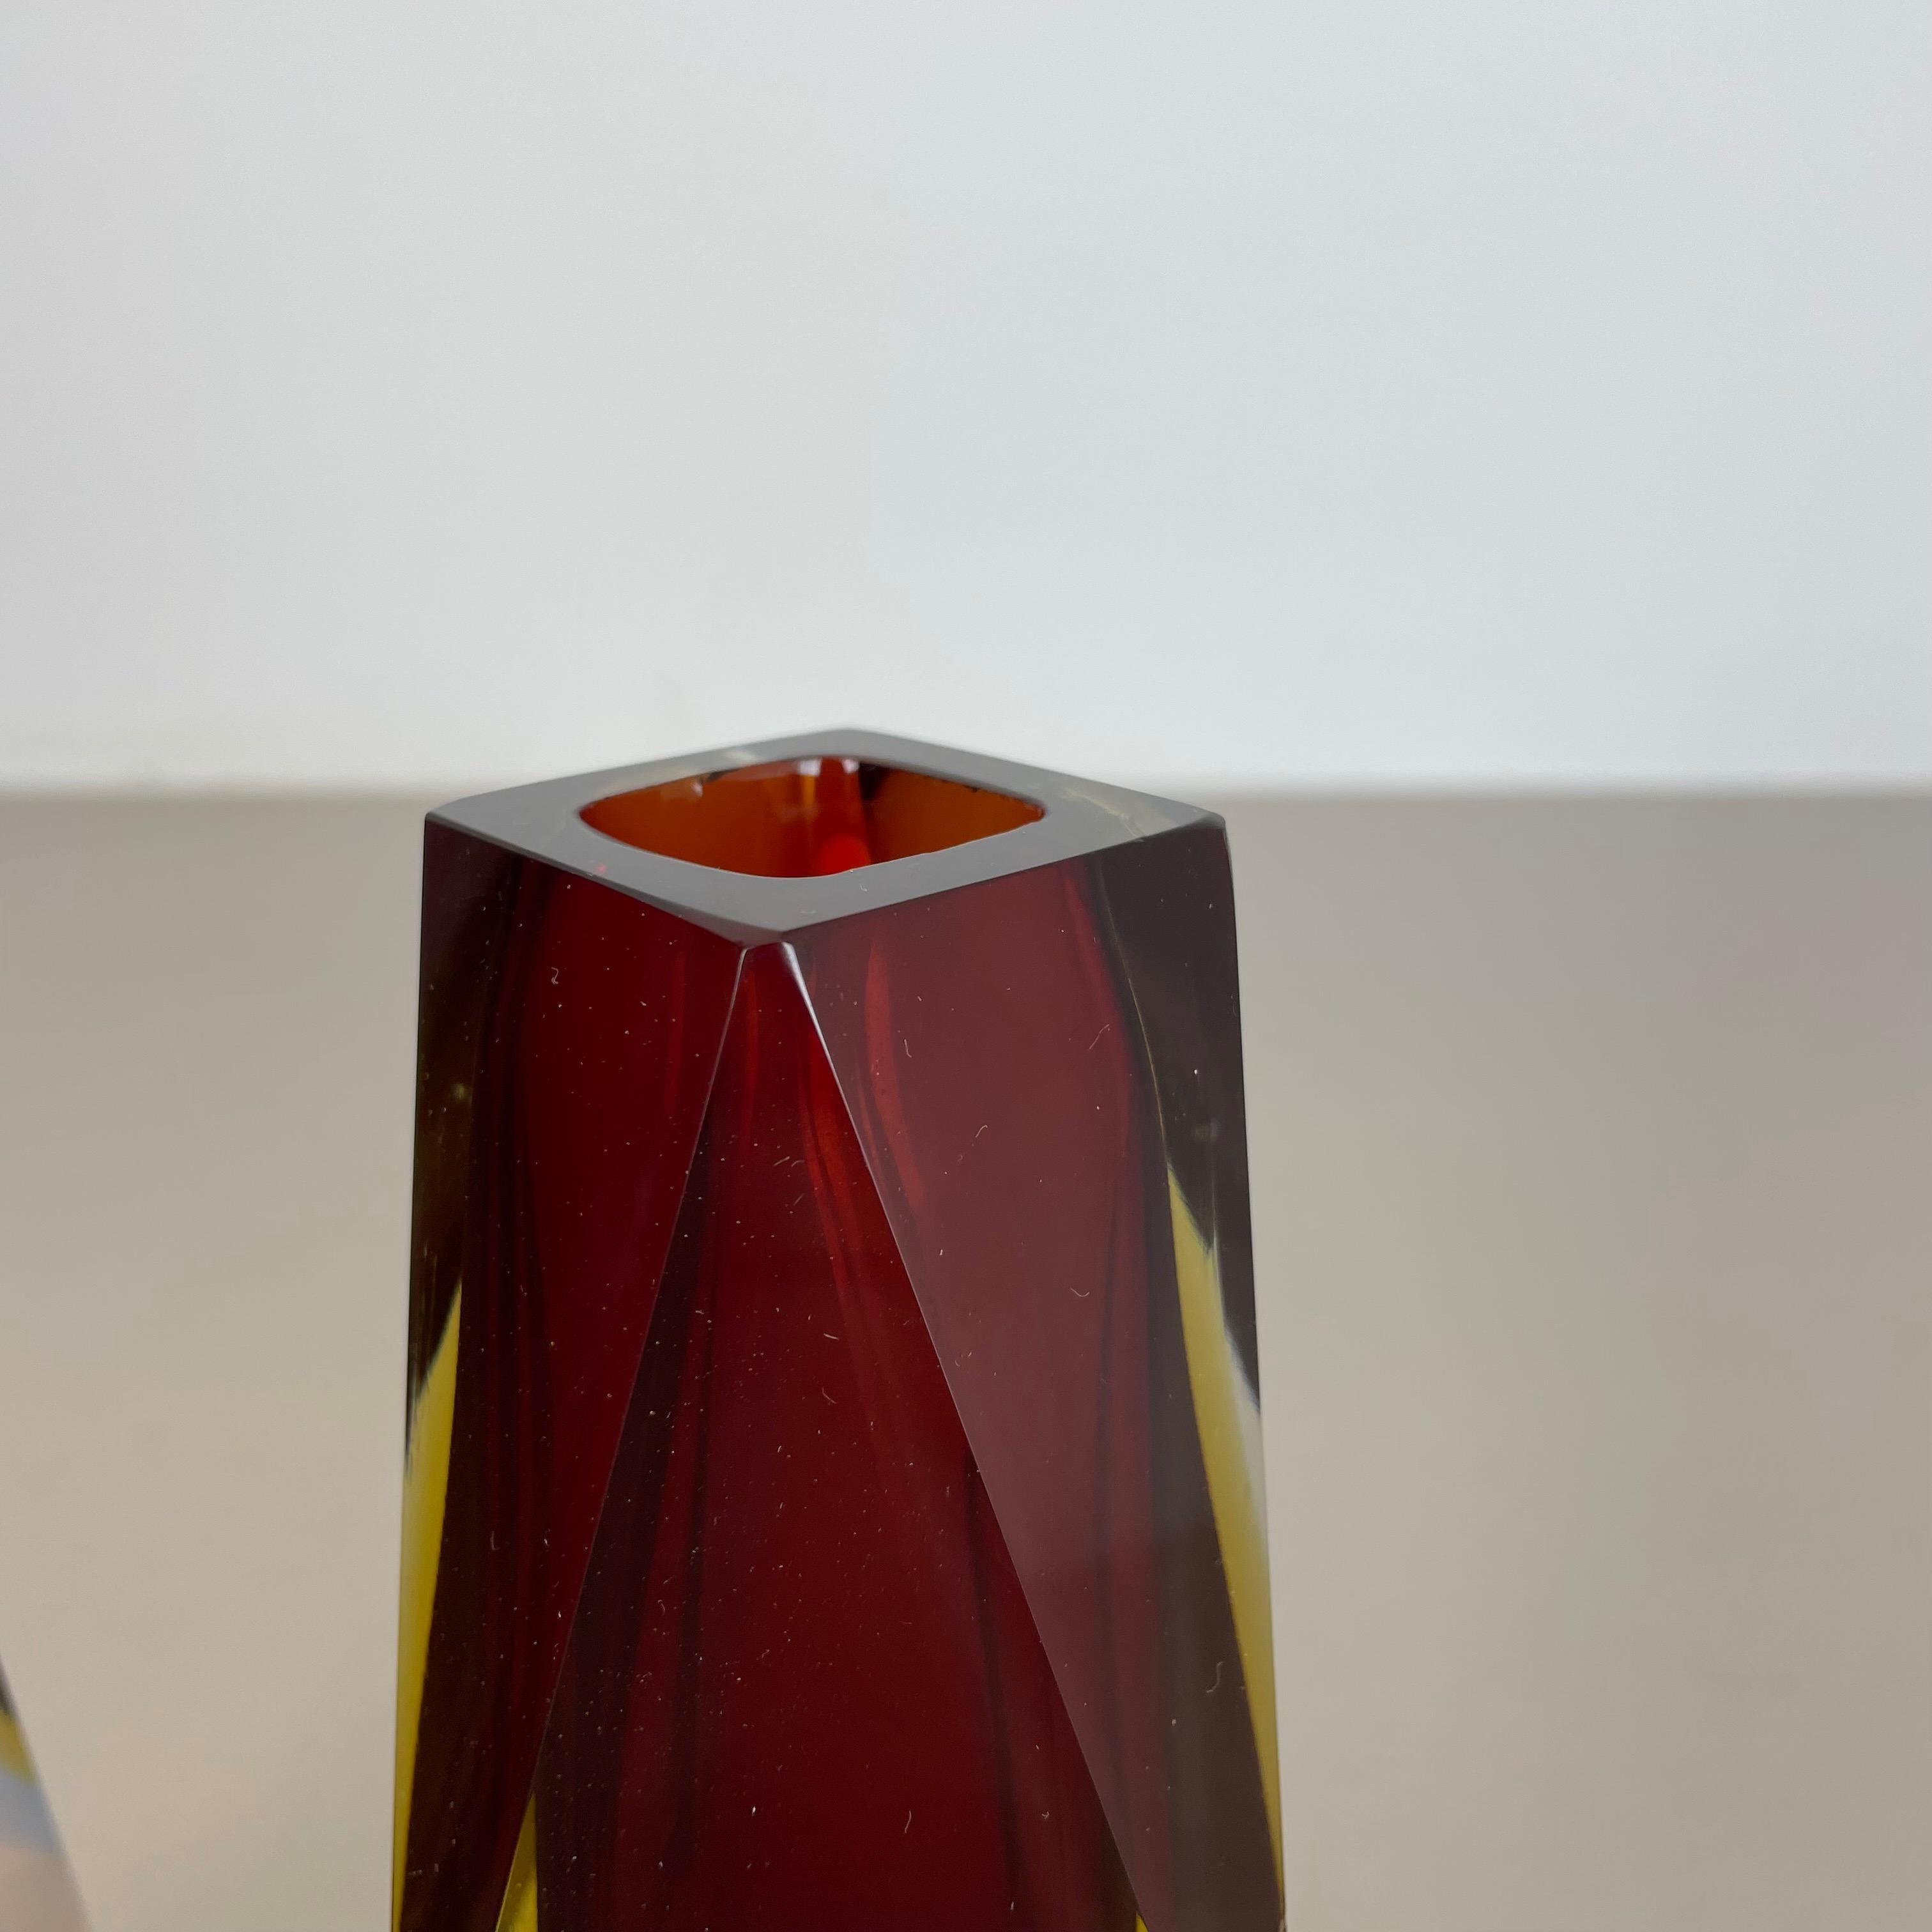 Set of 2 Faceted Murano Glass Sommerso Vase Designed by Flavio Poli Italy, 1970s For Sale 8